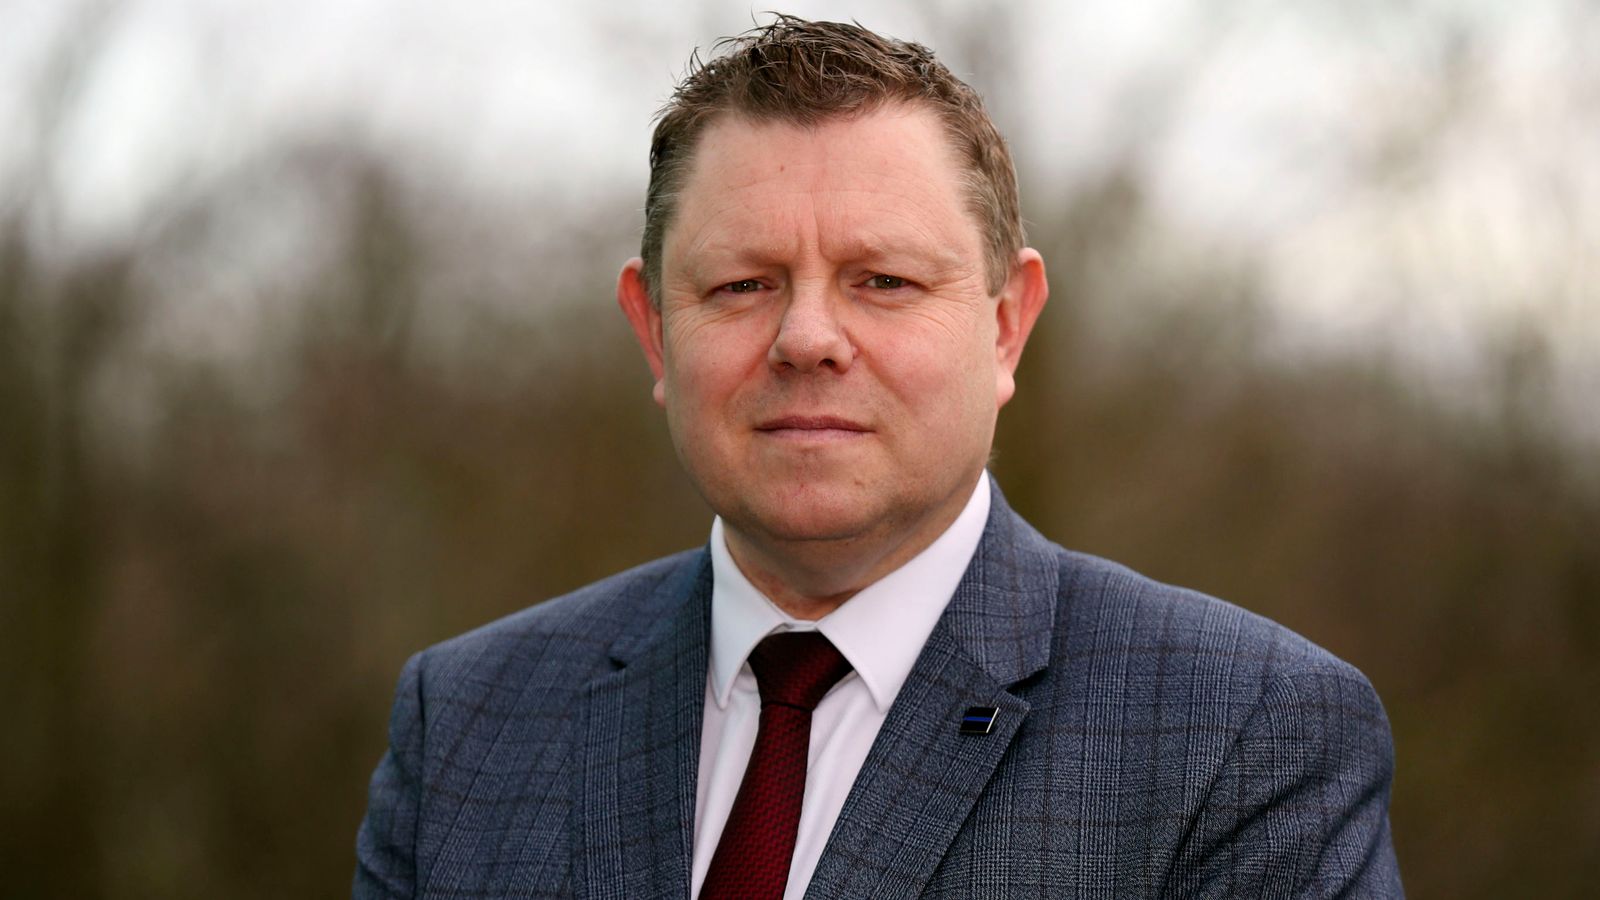 Former Police Federation chairman John Apter won't be prosecuted over sexual assault allegations